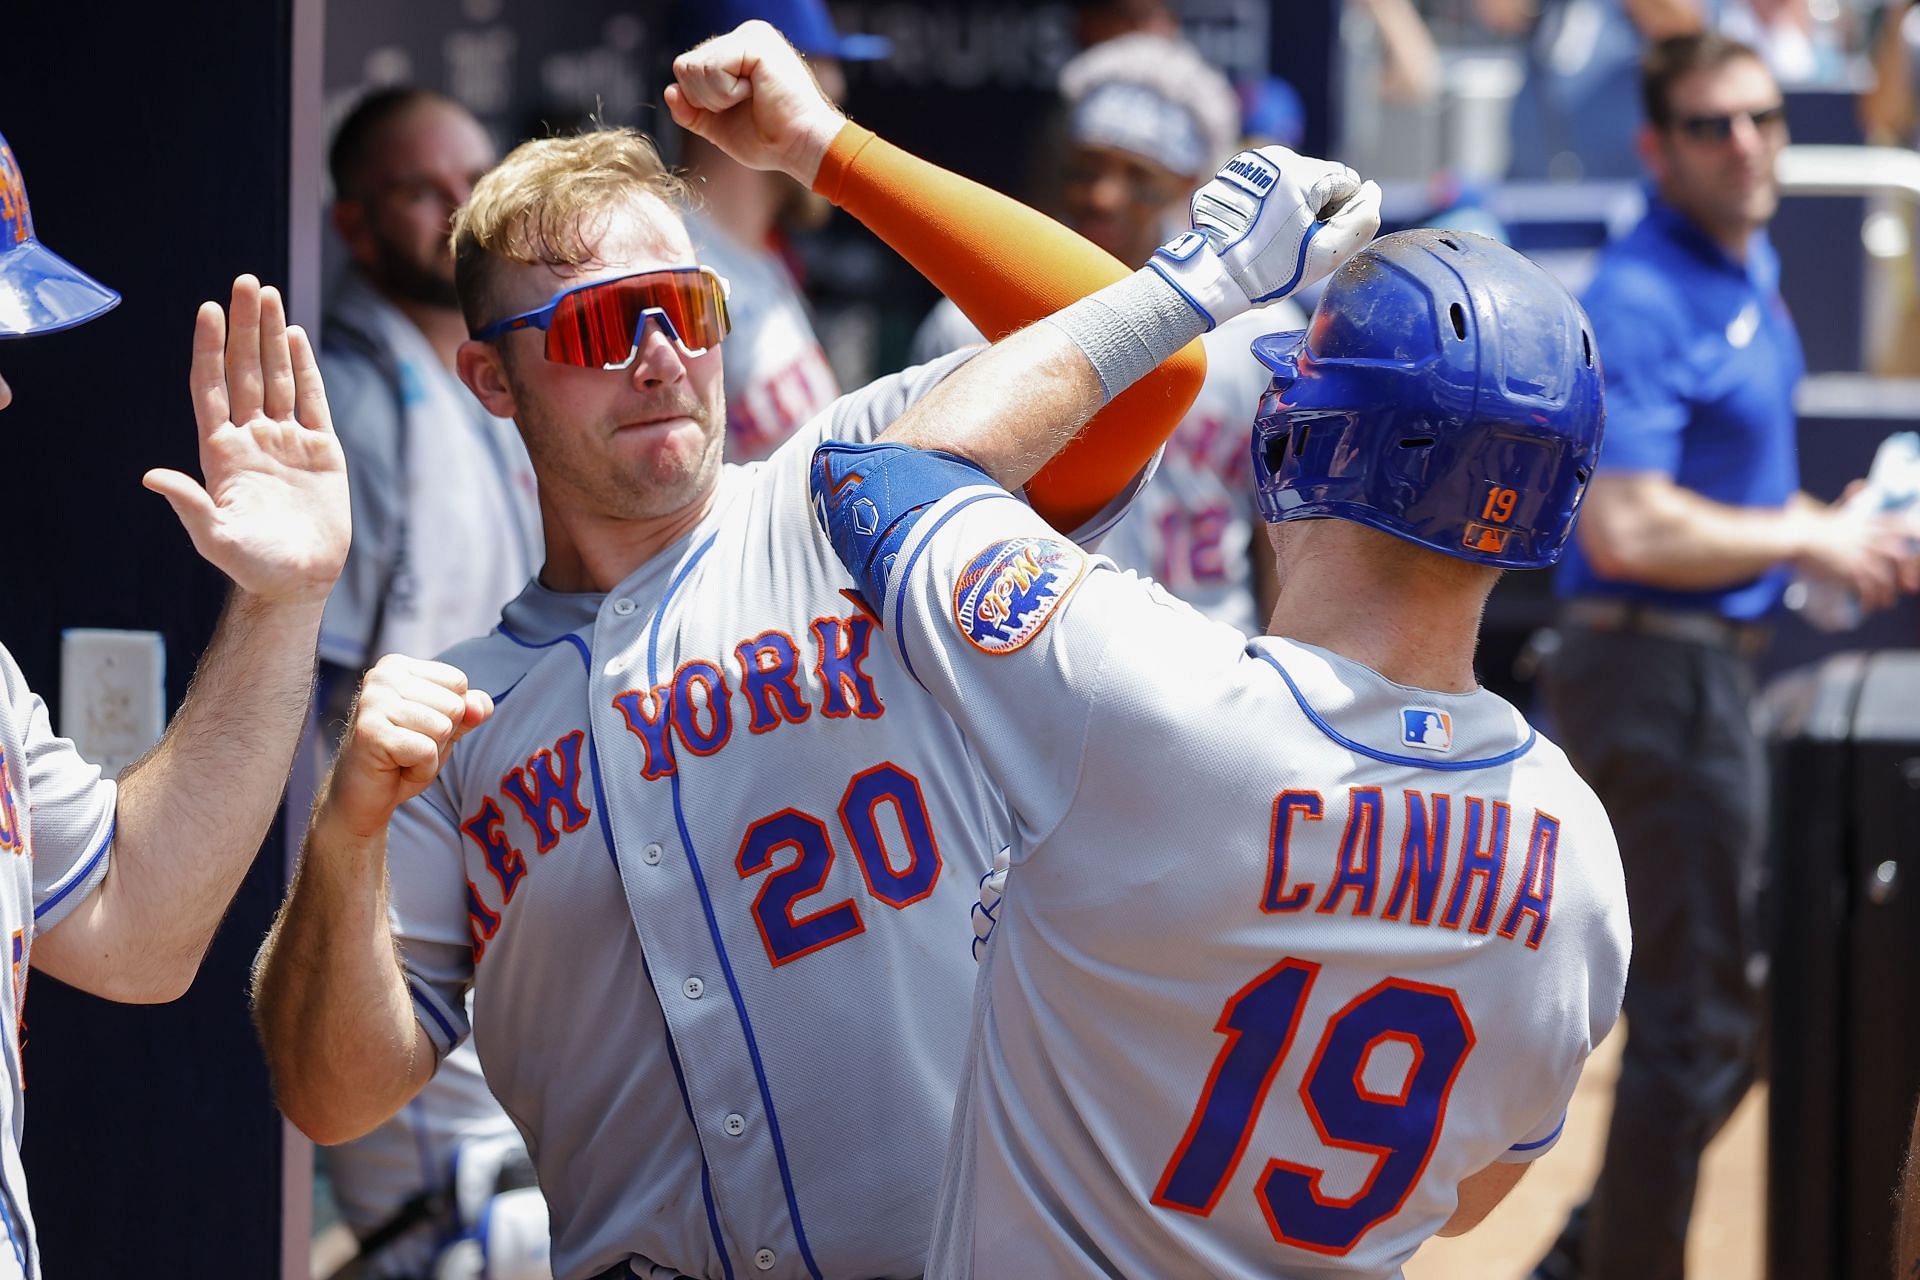 Pete Alonso gets brutally honest on Braves winning the NL East over Mets